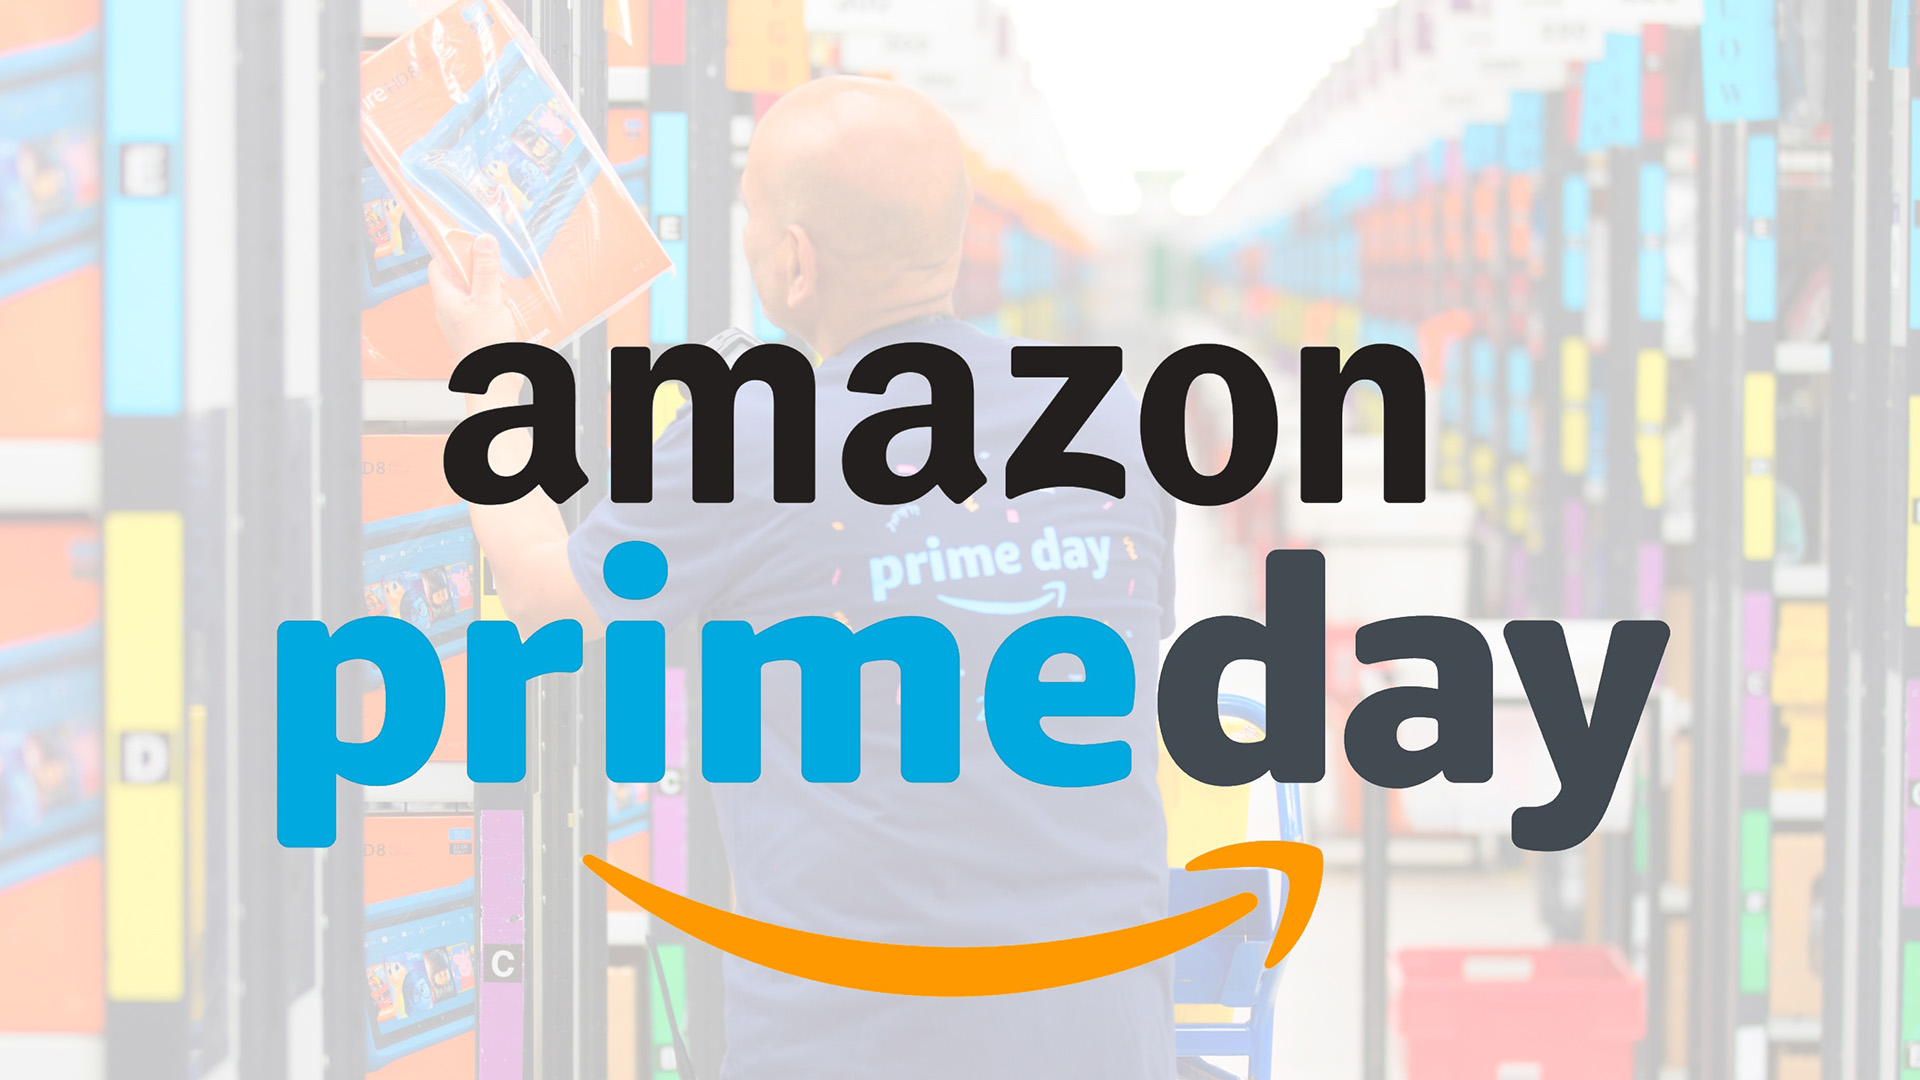 Watch Out These Fake Amazon Prime Day Bogus Sites Are Looking To Steal Your Wallet With Too